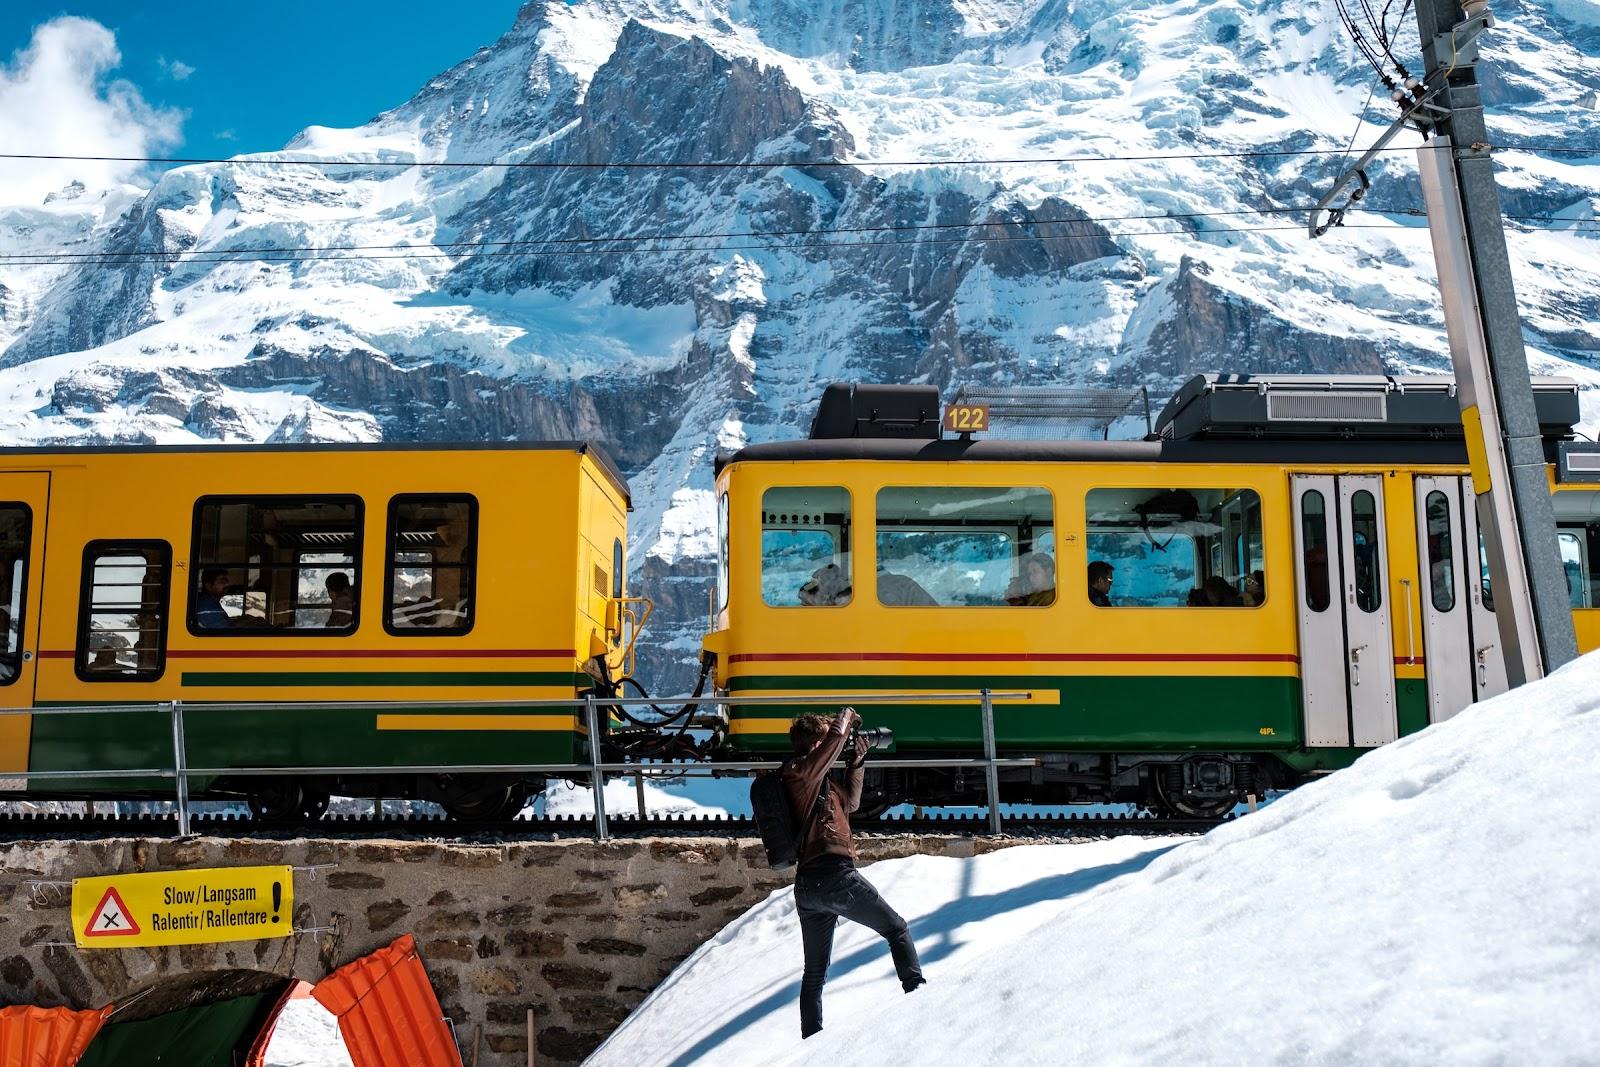 A mountain train on the Swiss alps